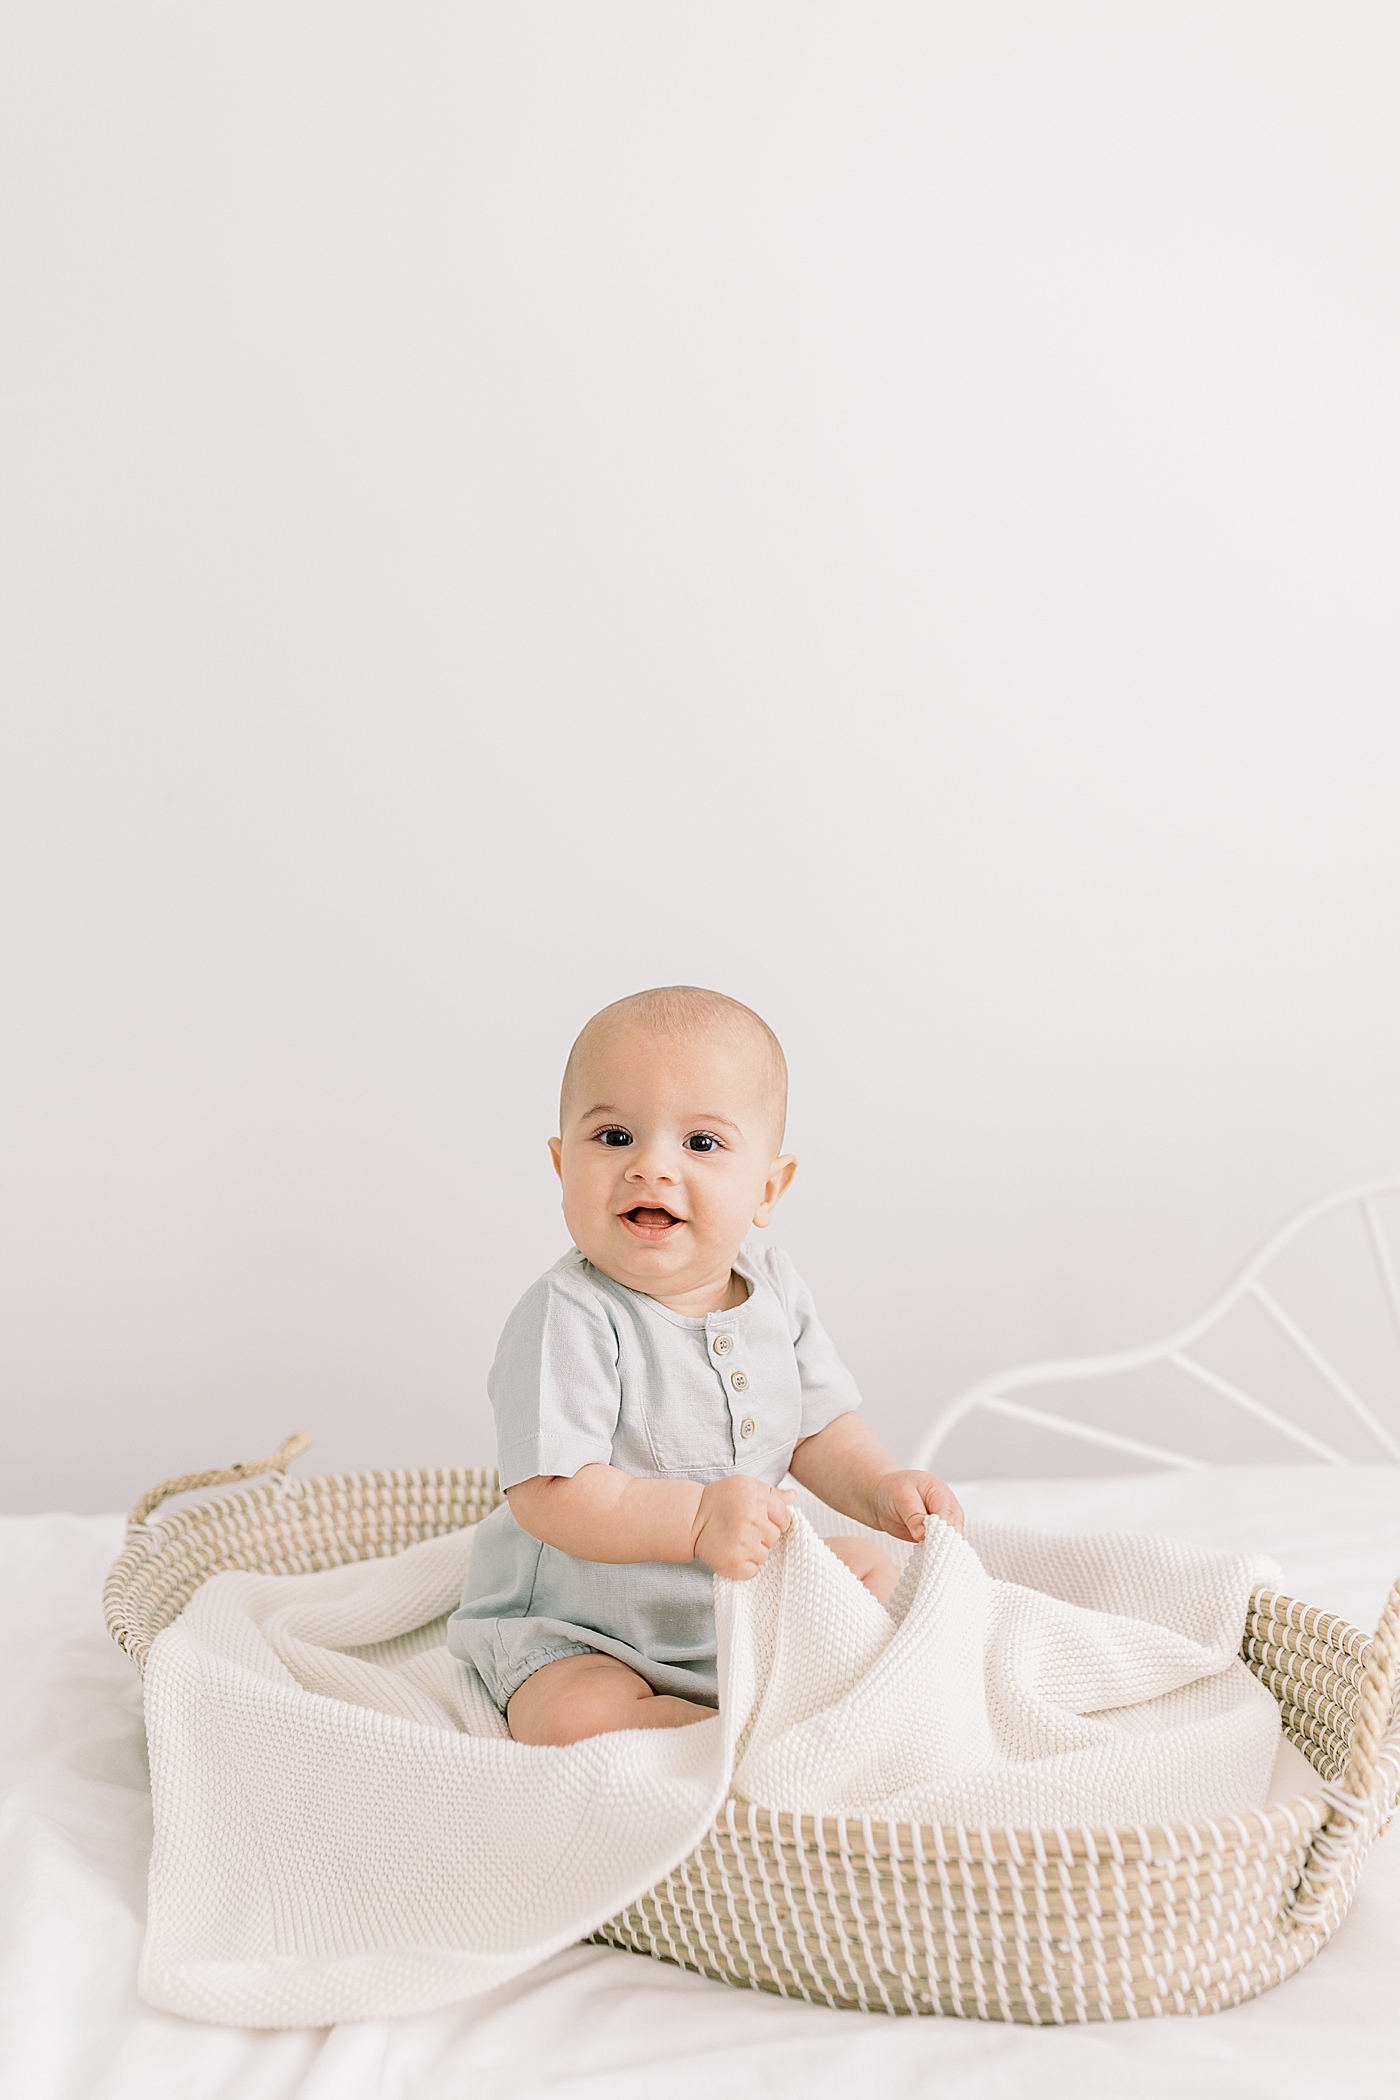 Baby sitting in a basket holding a wooden ship | Image by Caitlyn Motycka